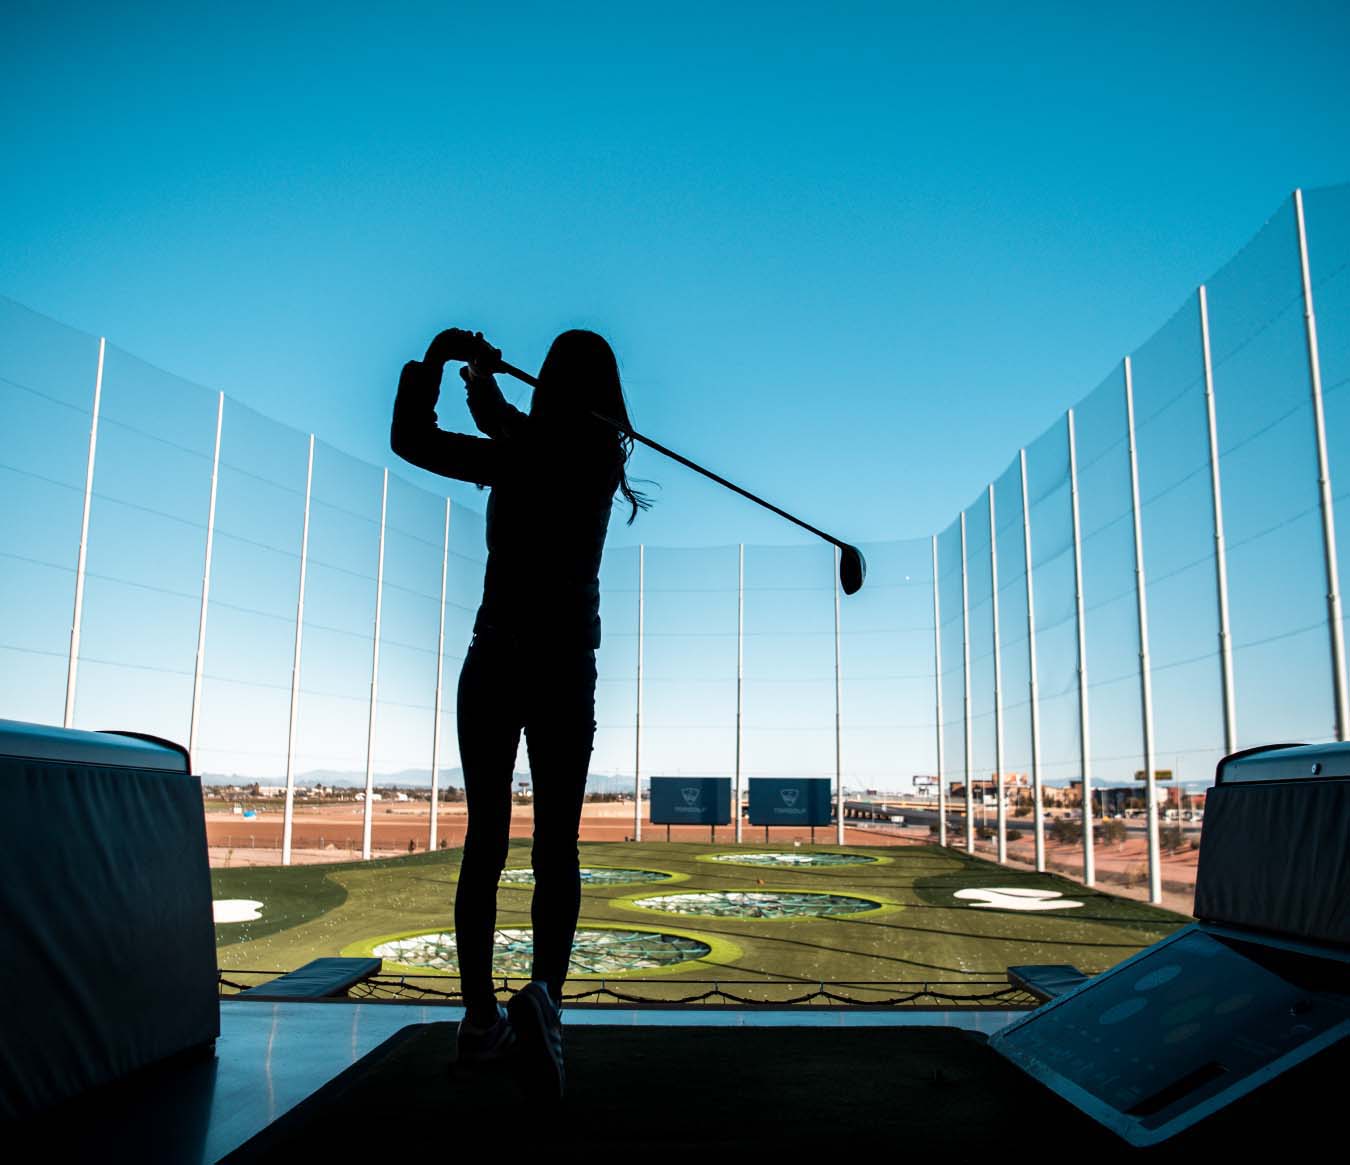 Things to Do in Salt Lake City - Topgolf